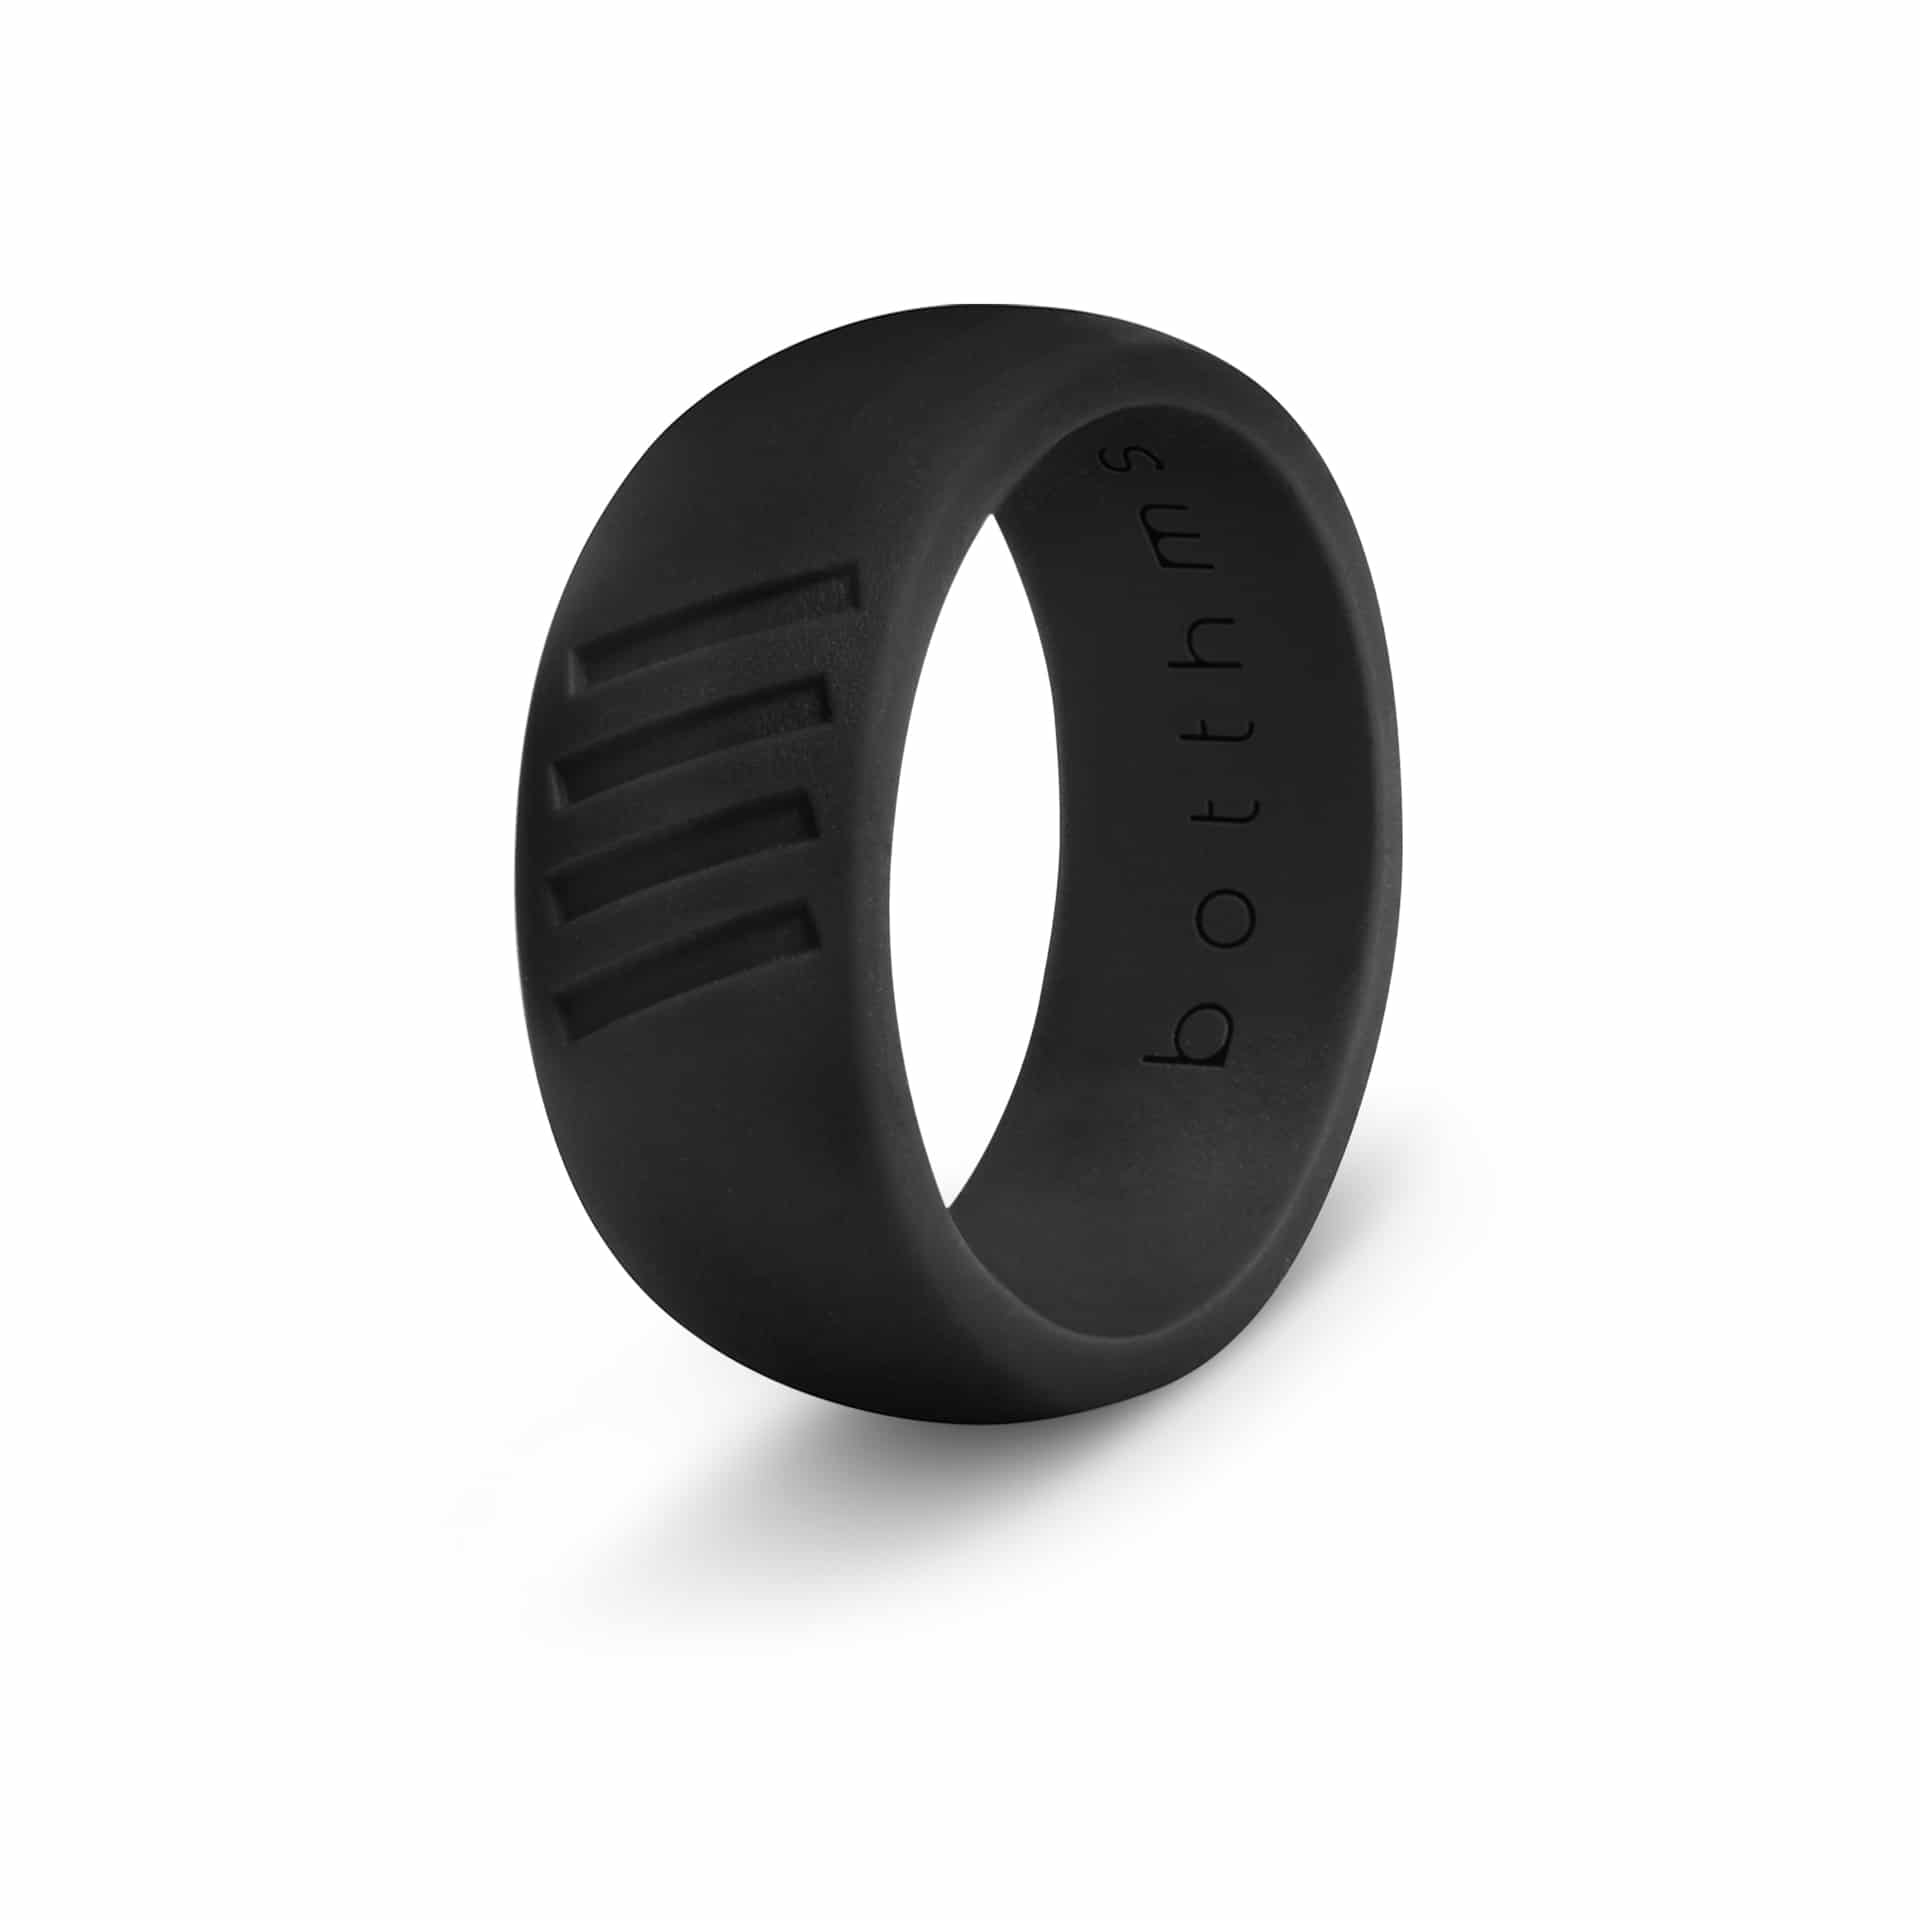 botthms Black Active Stripes Silicone Ring